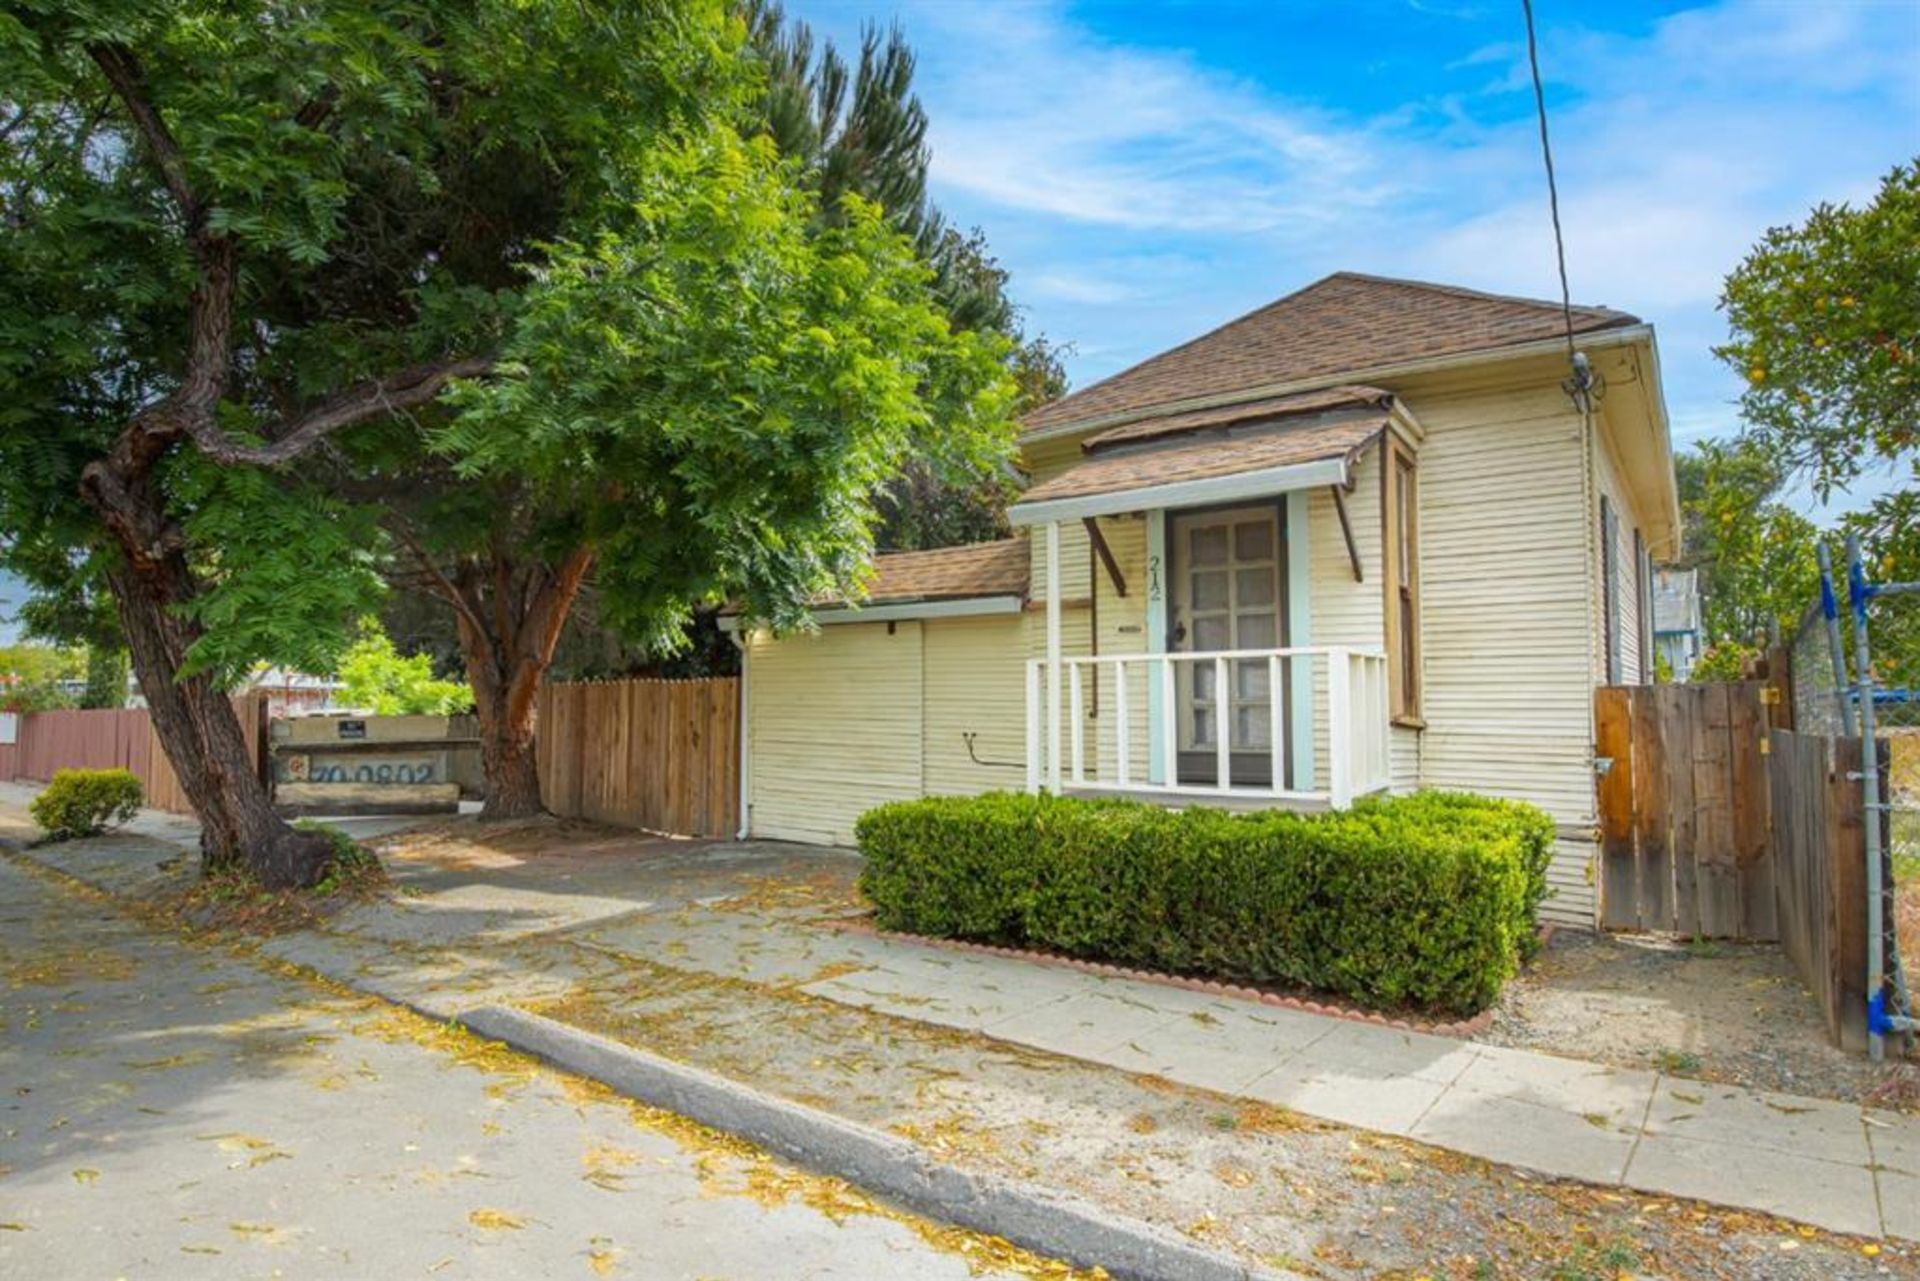 Just Listed! 212 Grand Avenue, San Jose, CA (2 Bed | 1 Bath | 700 sq for $999,000)